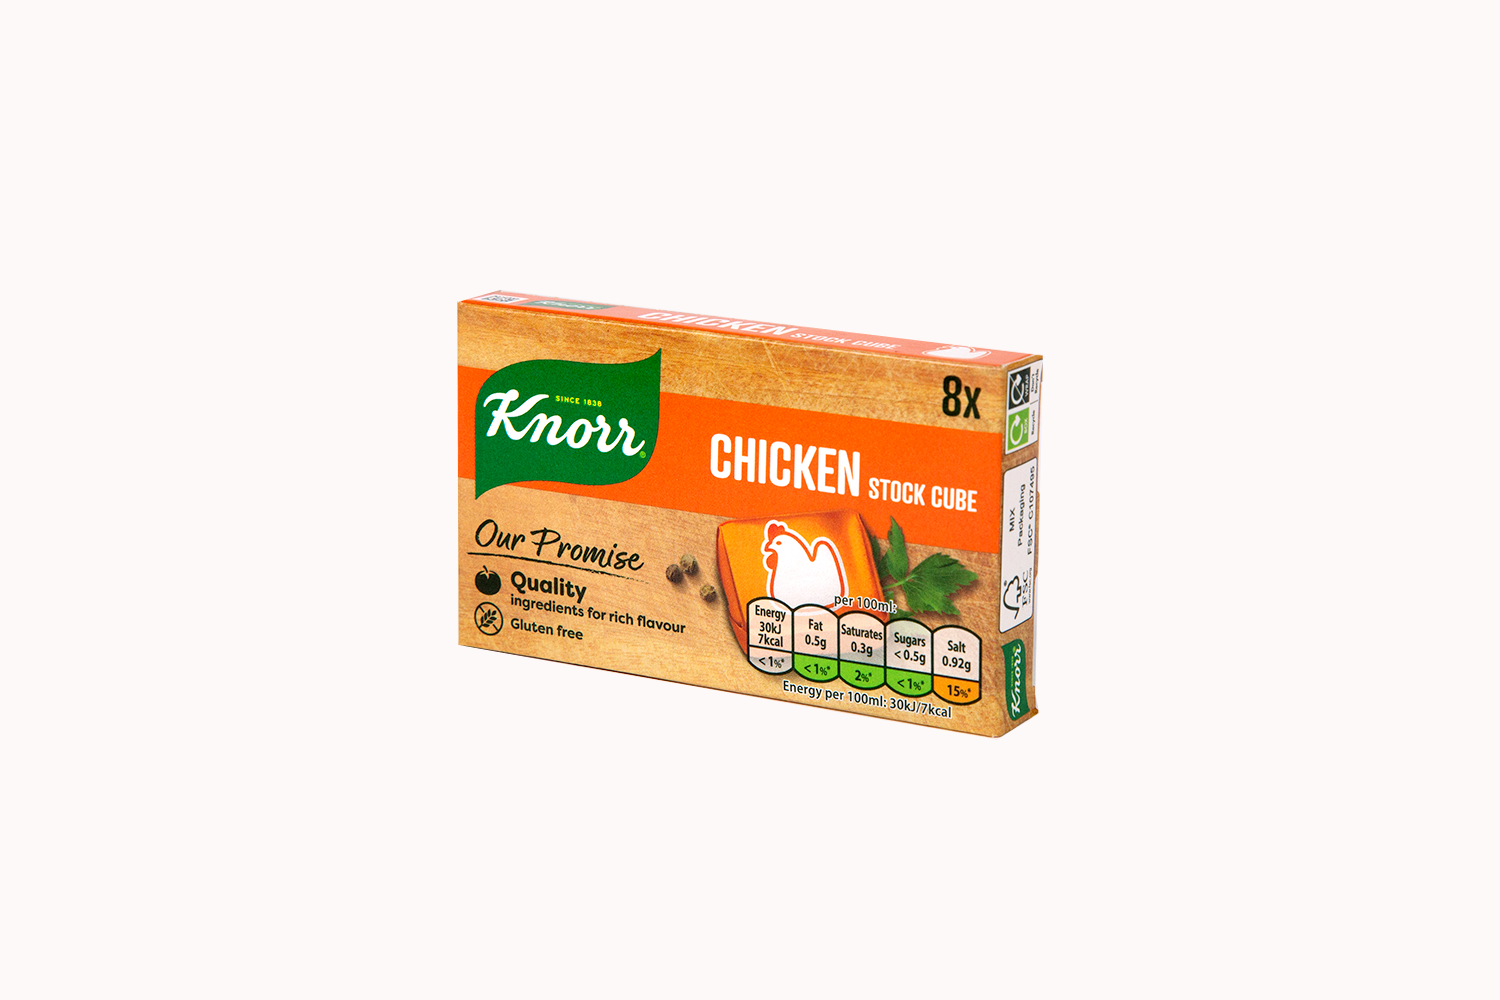 Knorr Chicken Stock Cube